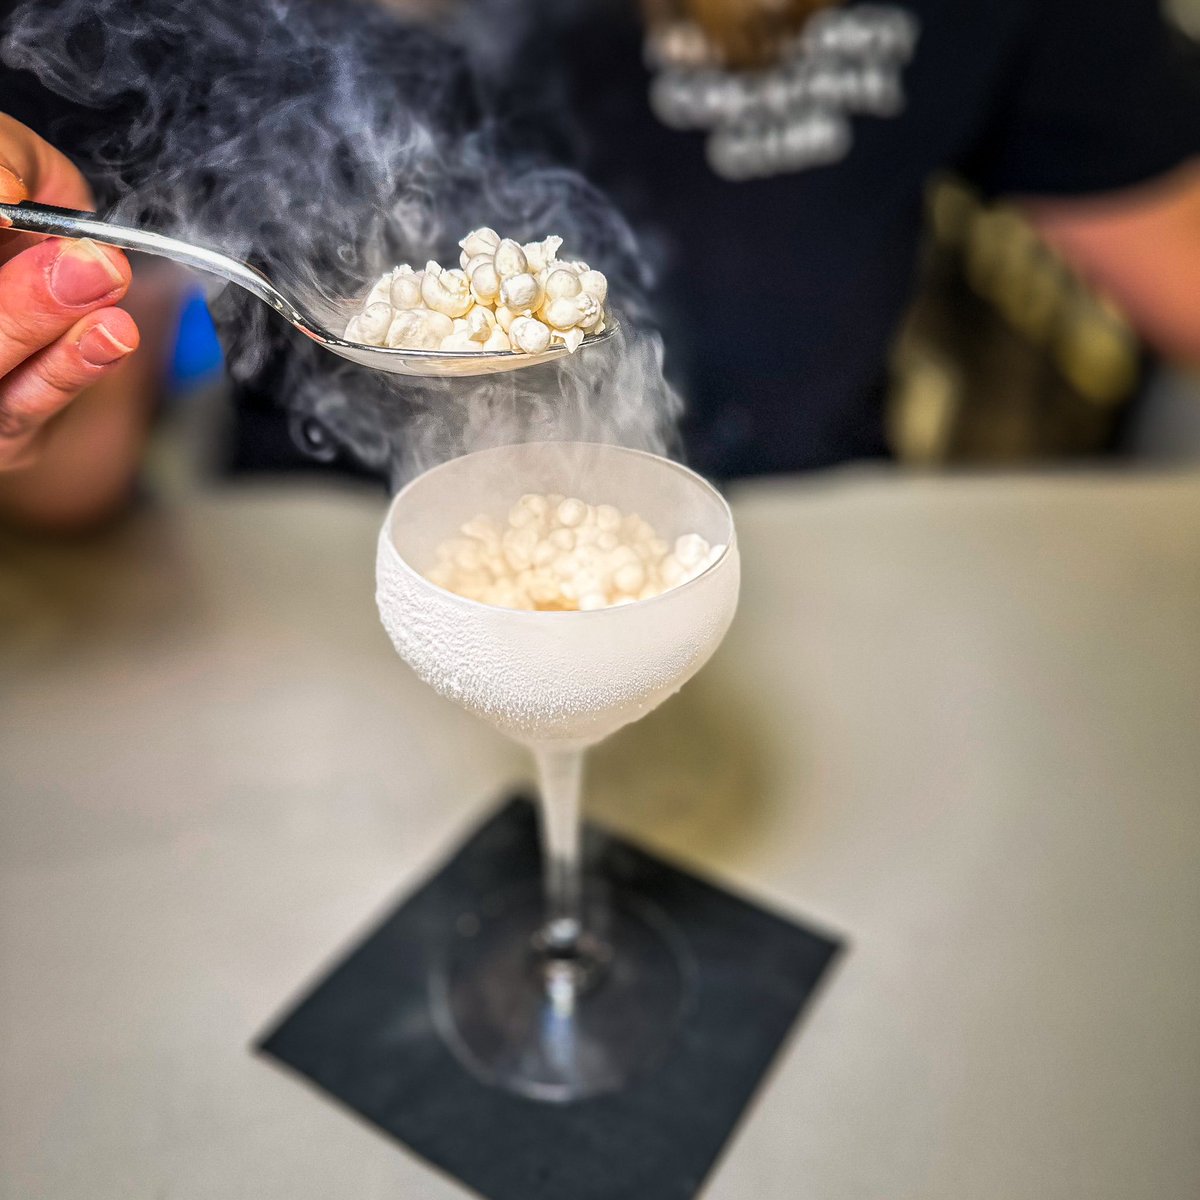 Special this weekend: fun with liquid nitrogen! 💨 

Greg’s Milk Pie Dots (fun take on Dippin’ Dots)

#gorockford #rockfordeats #visitrockfordil #rockfordil